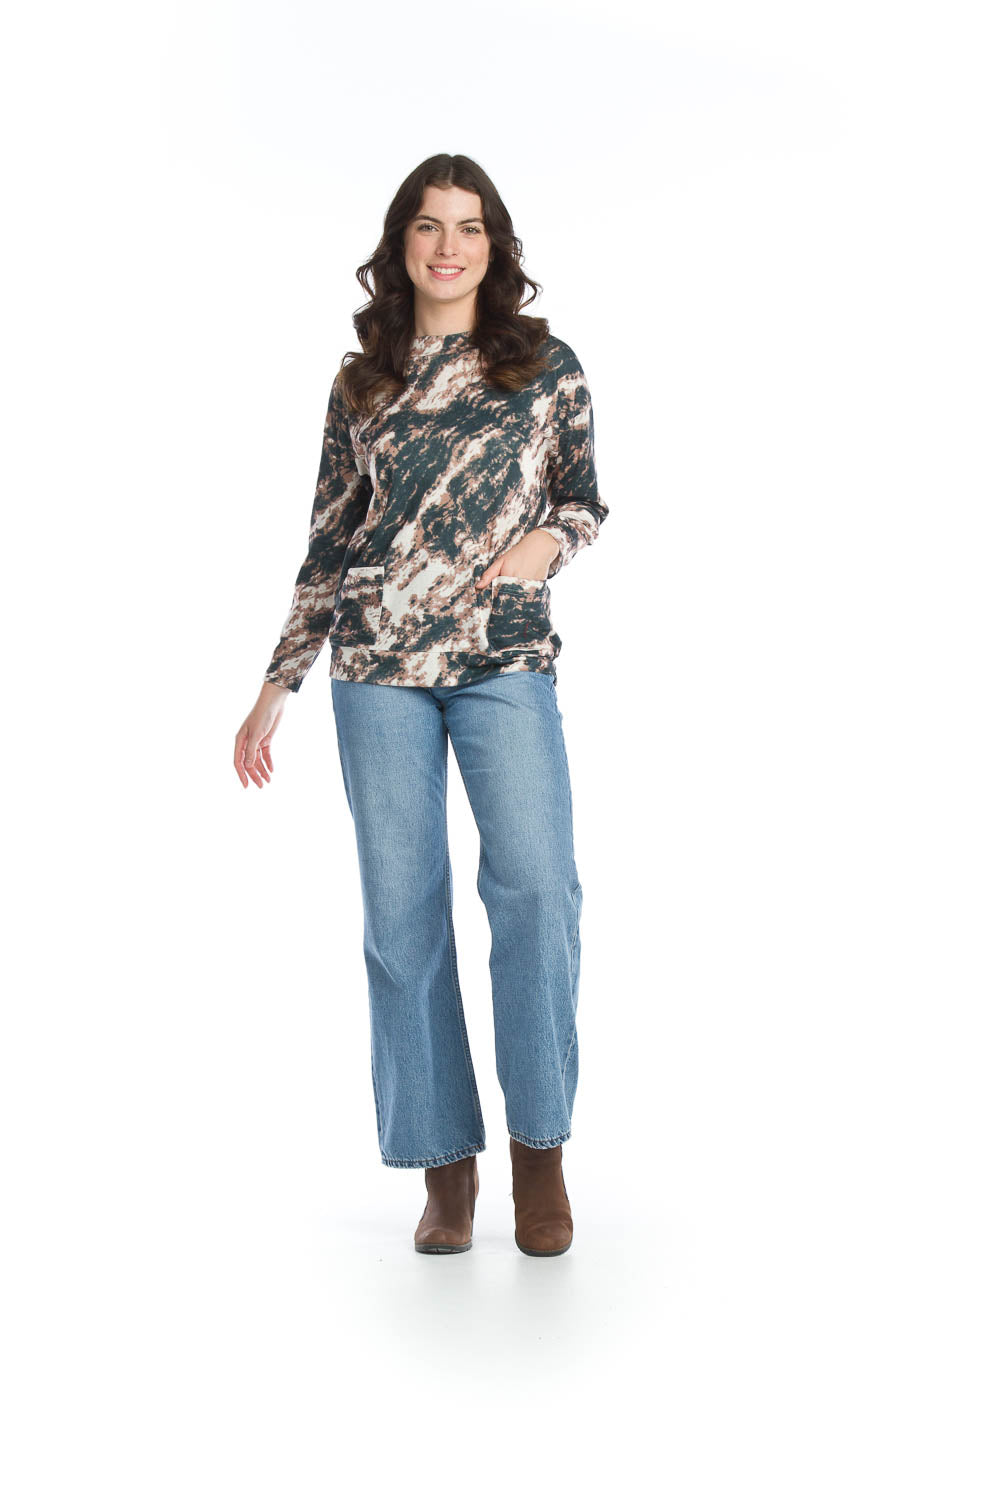 ST-13290 -Tie Dye Stretchy Banded Tunic with Pockets